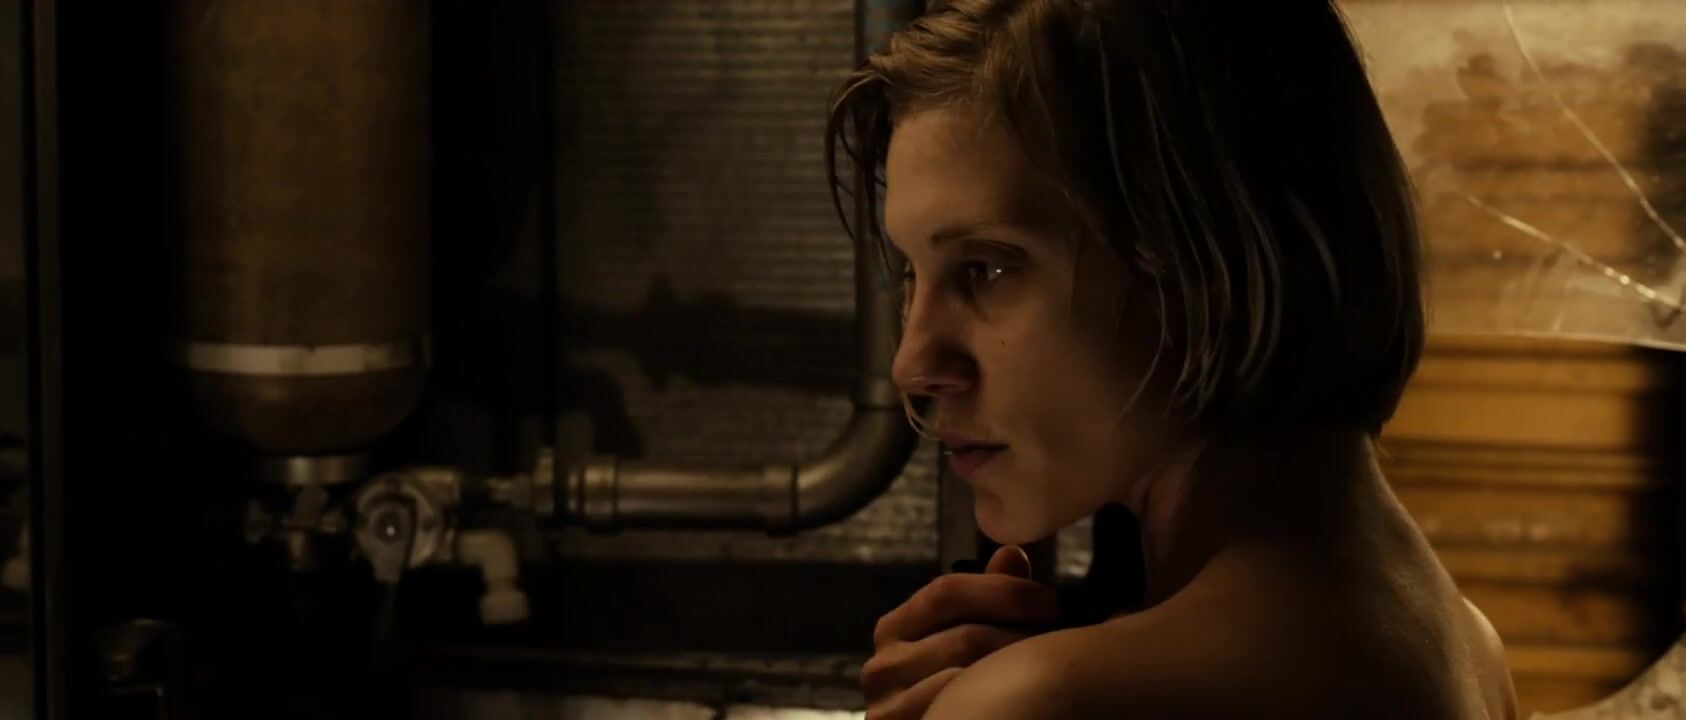 Real Orgasms Riddick tells story of Katee Sackhoff who takes clothes off and goes washing body (2013) Three Some - 2